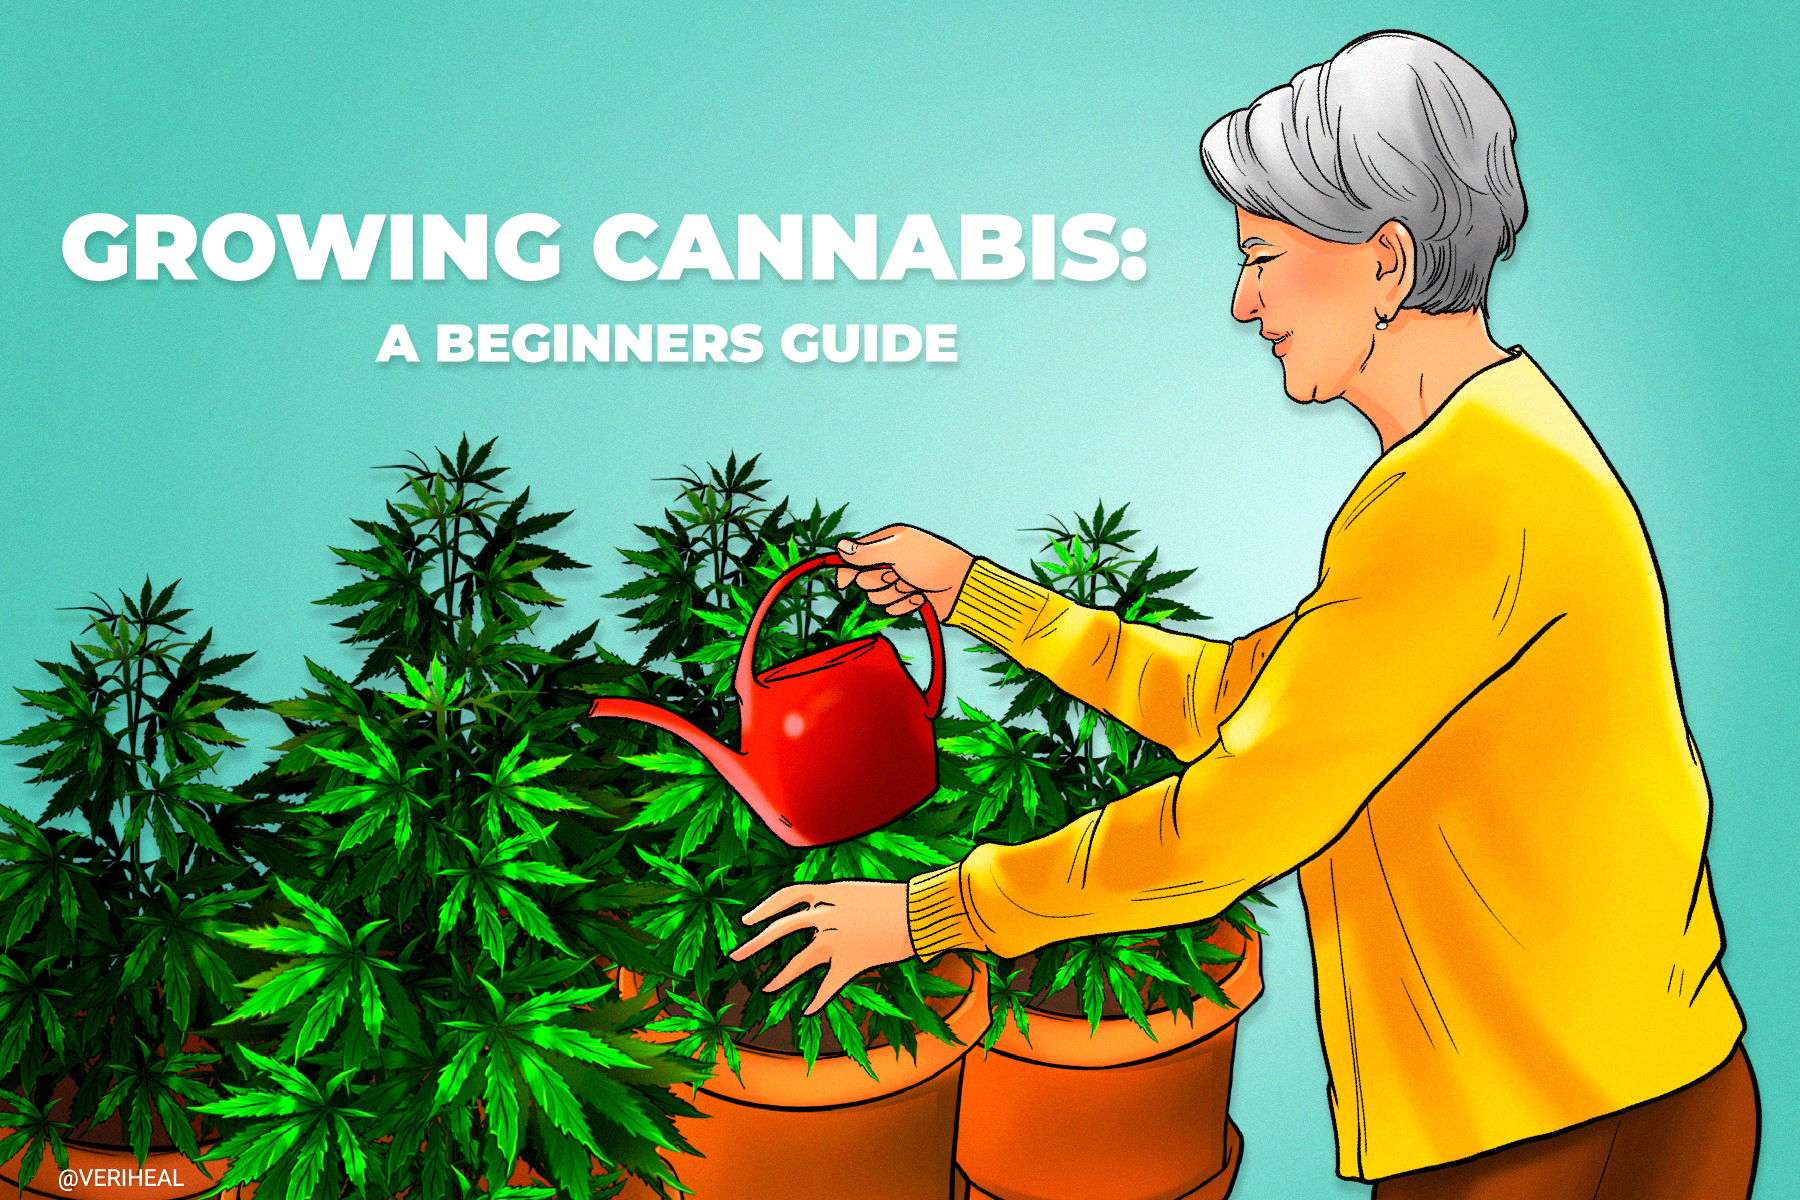 https://www.veriheal.com/blog/wp-content/uploads/2021/07/Everything-You-Need-to-Know-About-Growing-Cannabis-A-Beginners-Guide.jpg